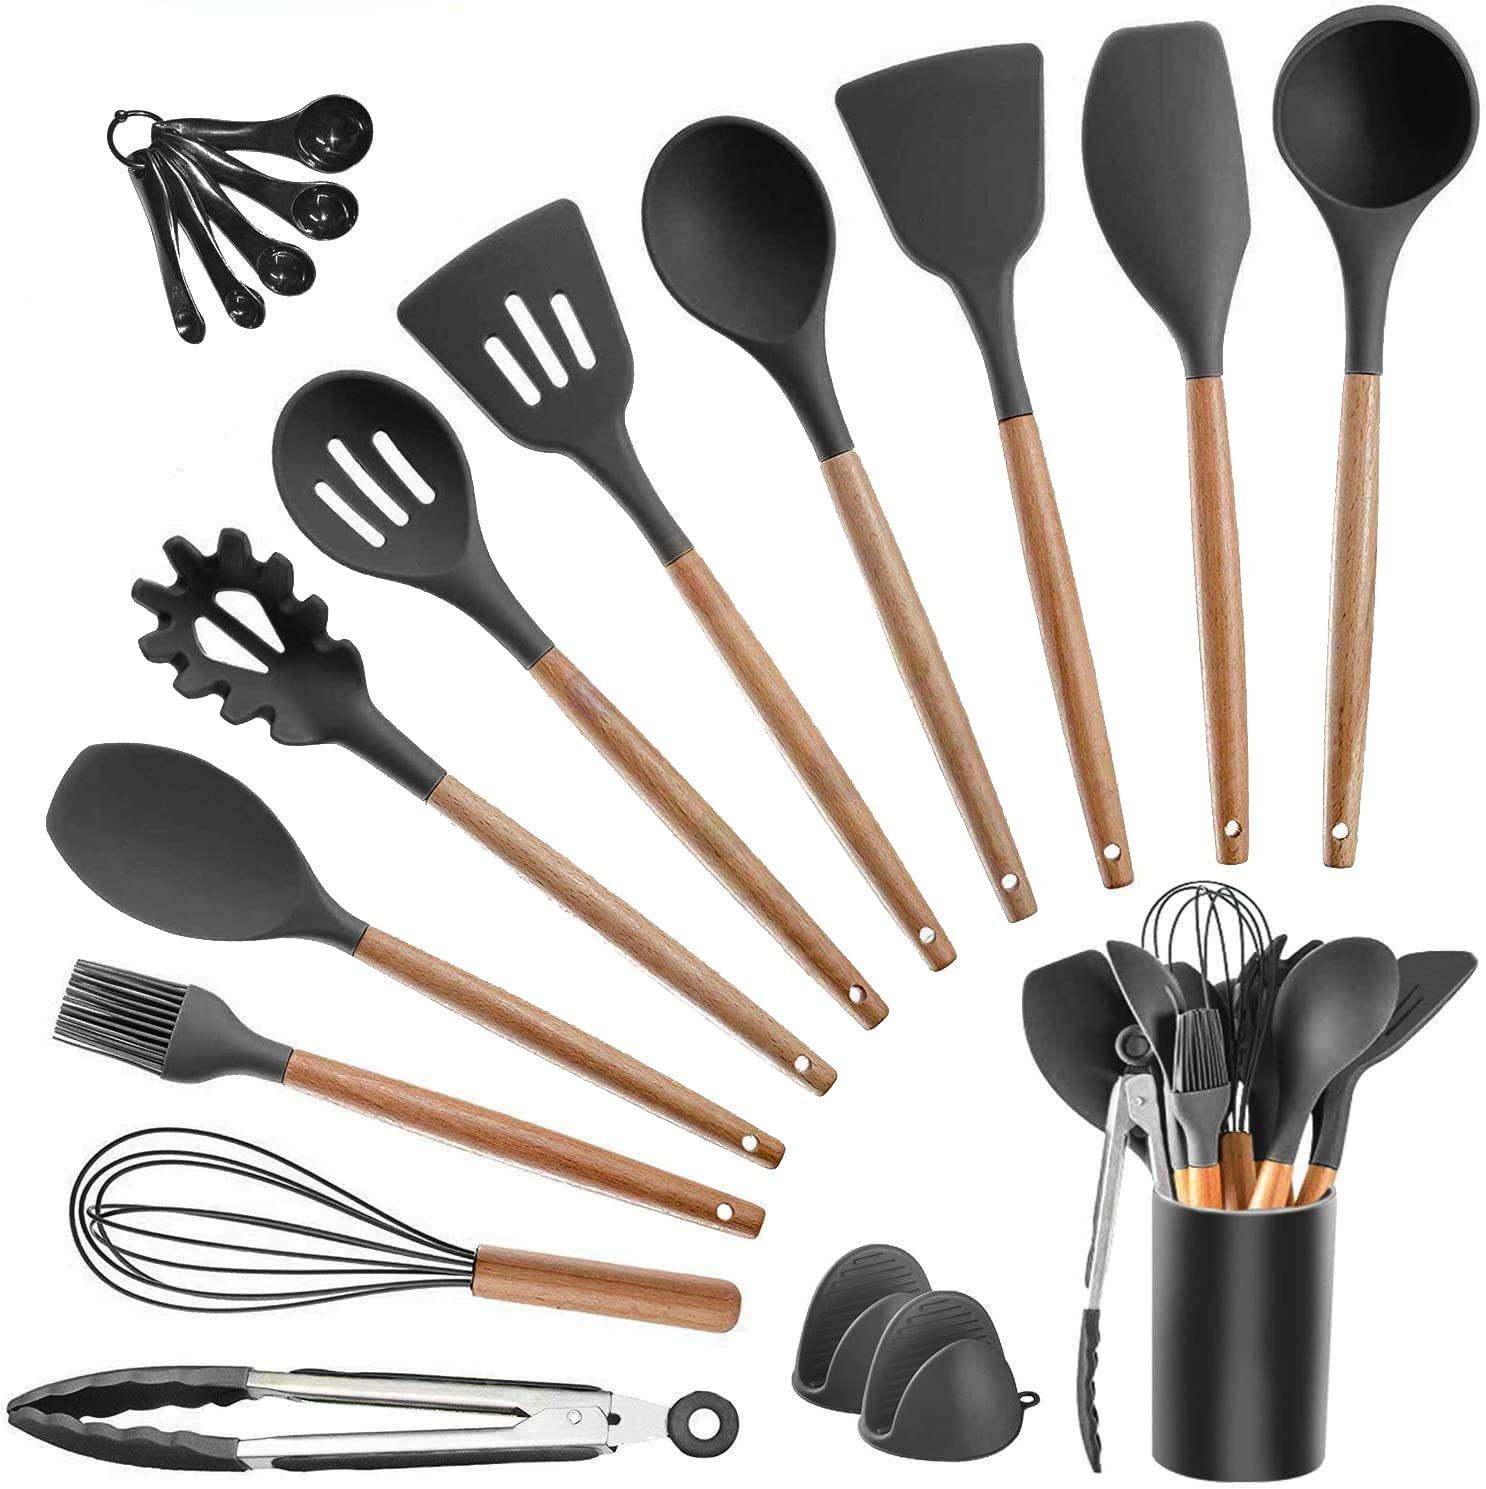 Dishwasher Safe Silicone Cooking Utensils - Heat Resistant Kitchen Utensil  Set with Stainless Steel Handle, Spatula,Turner, Slotted Spoon,Tong, Kitchen  Gadgets for Non-Stick Cookware, BPA FREE (Grey) 